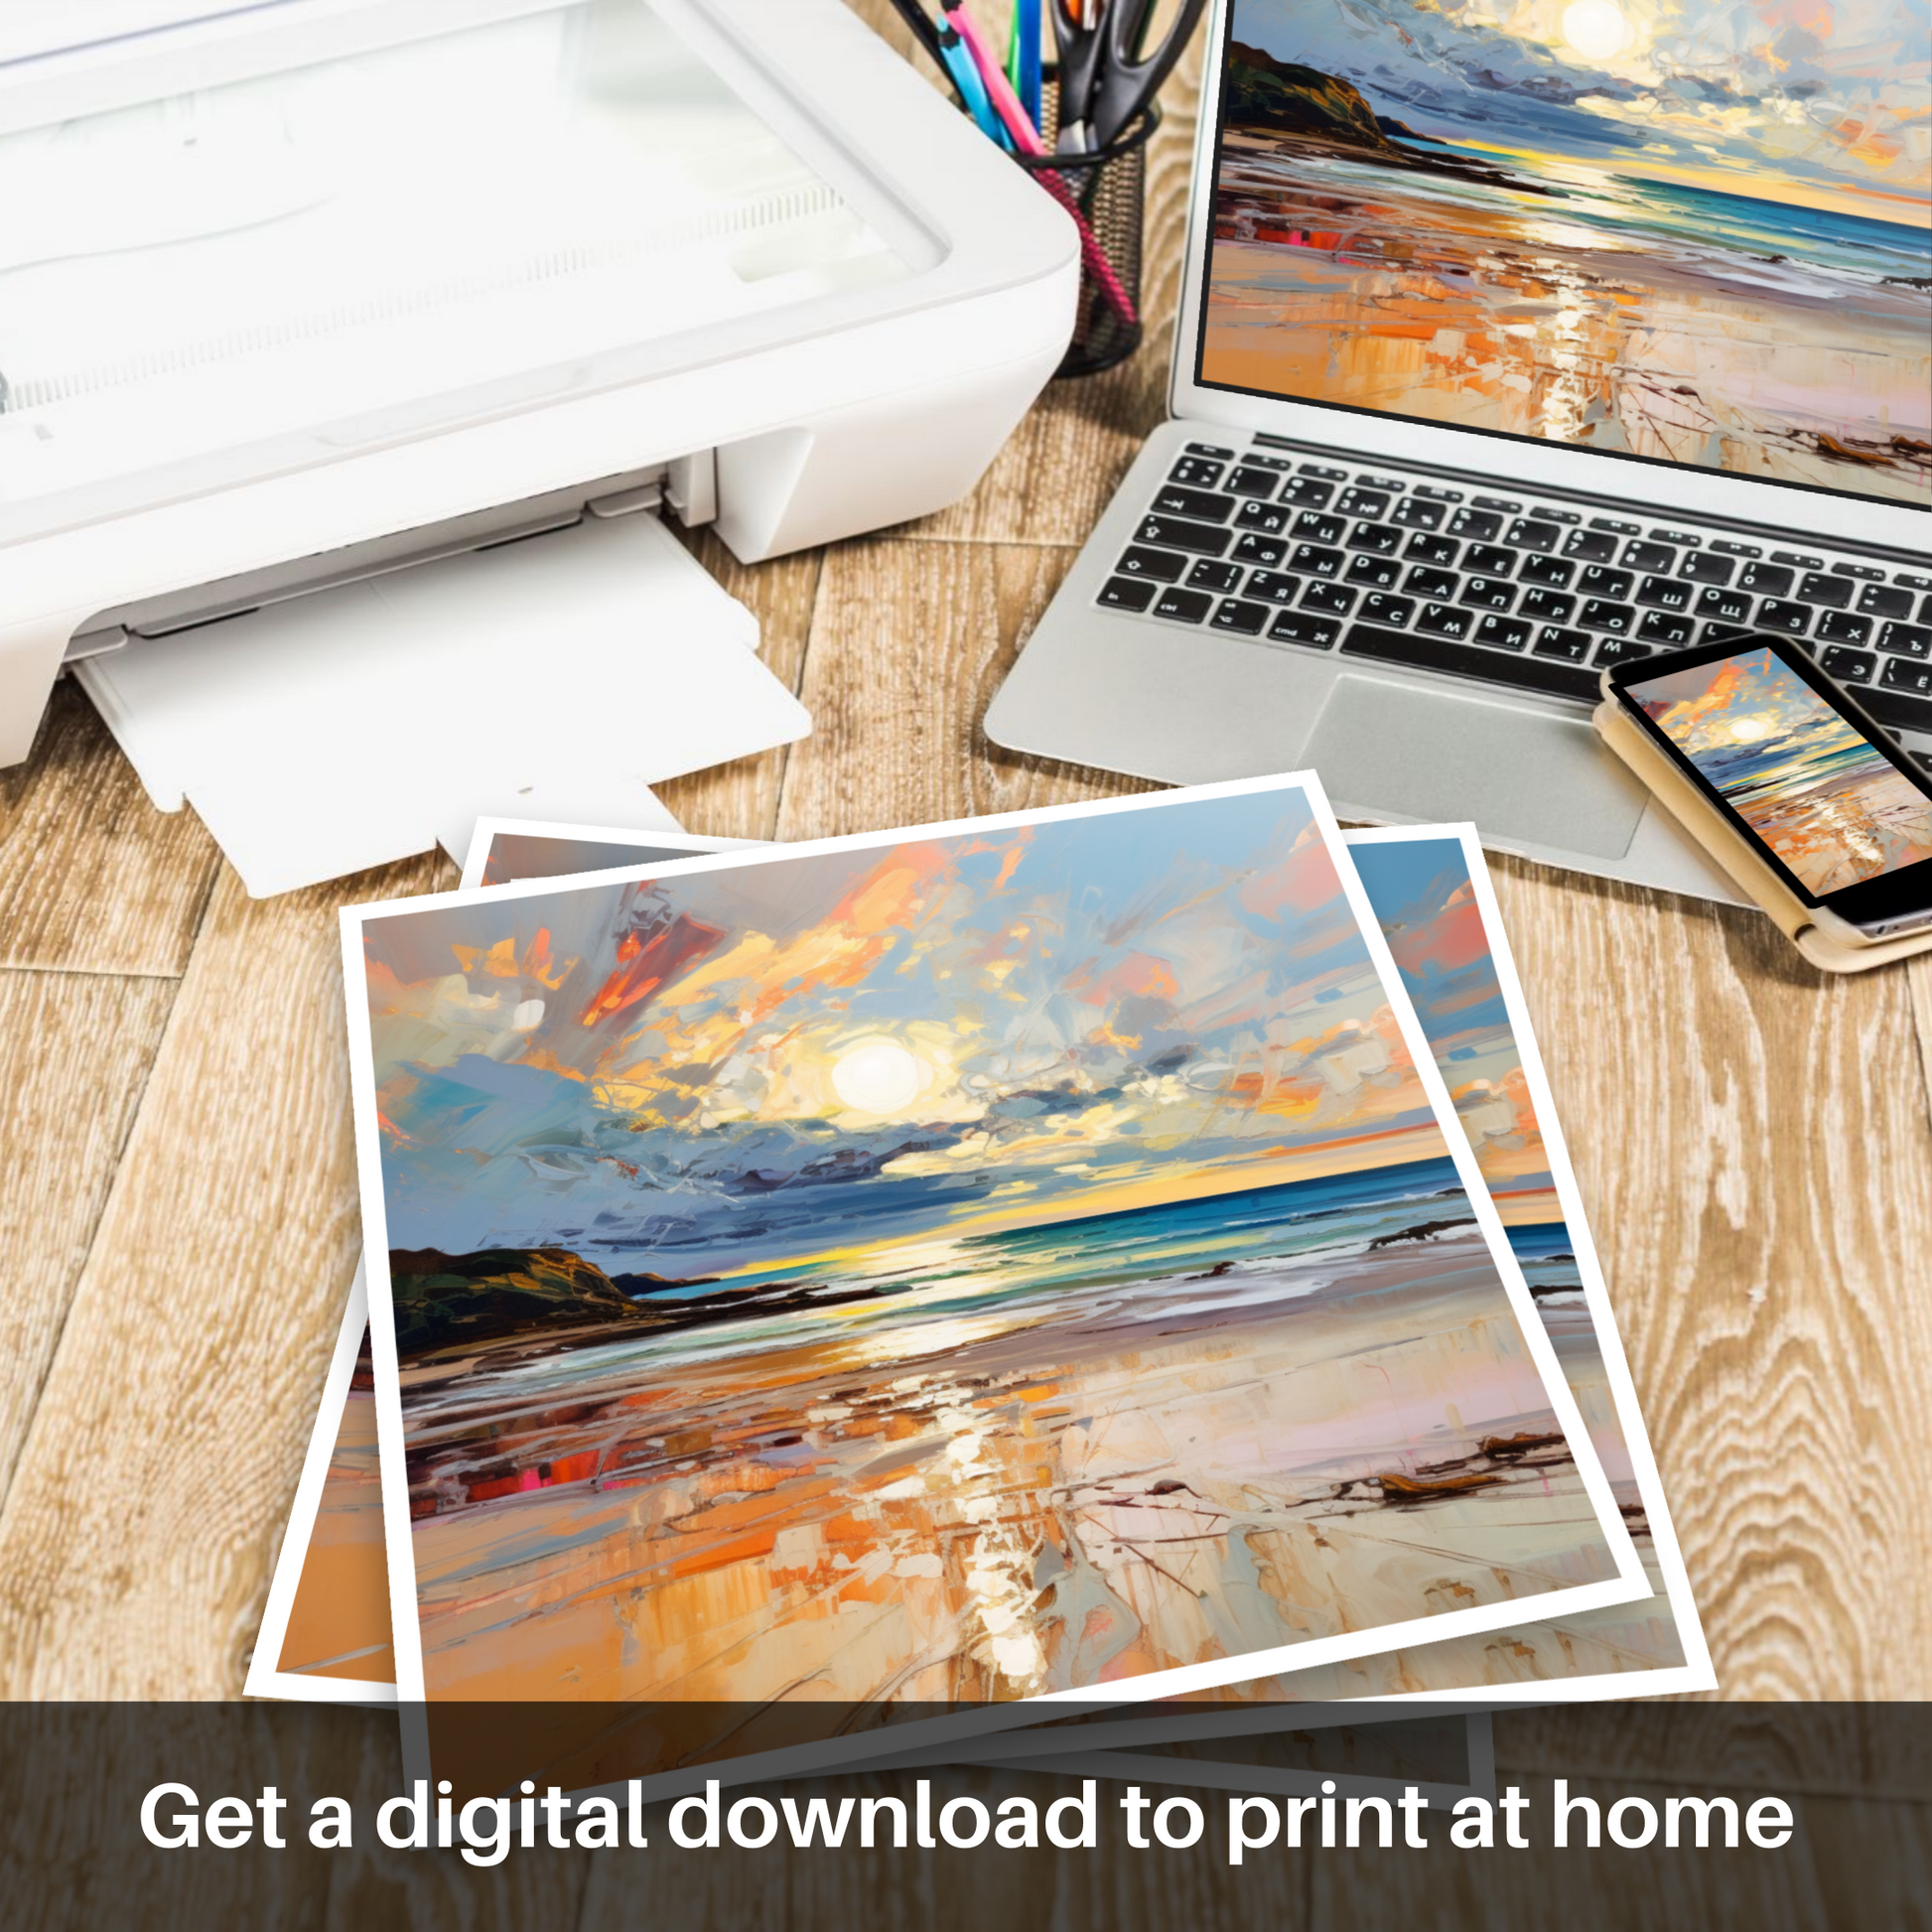 Downloadable and printable picture of Gullane Beach at sunset